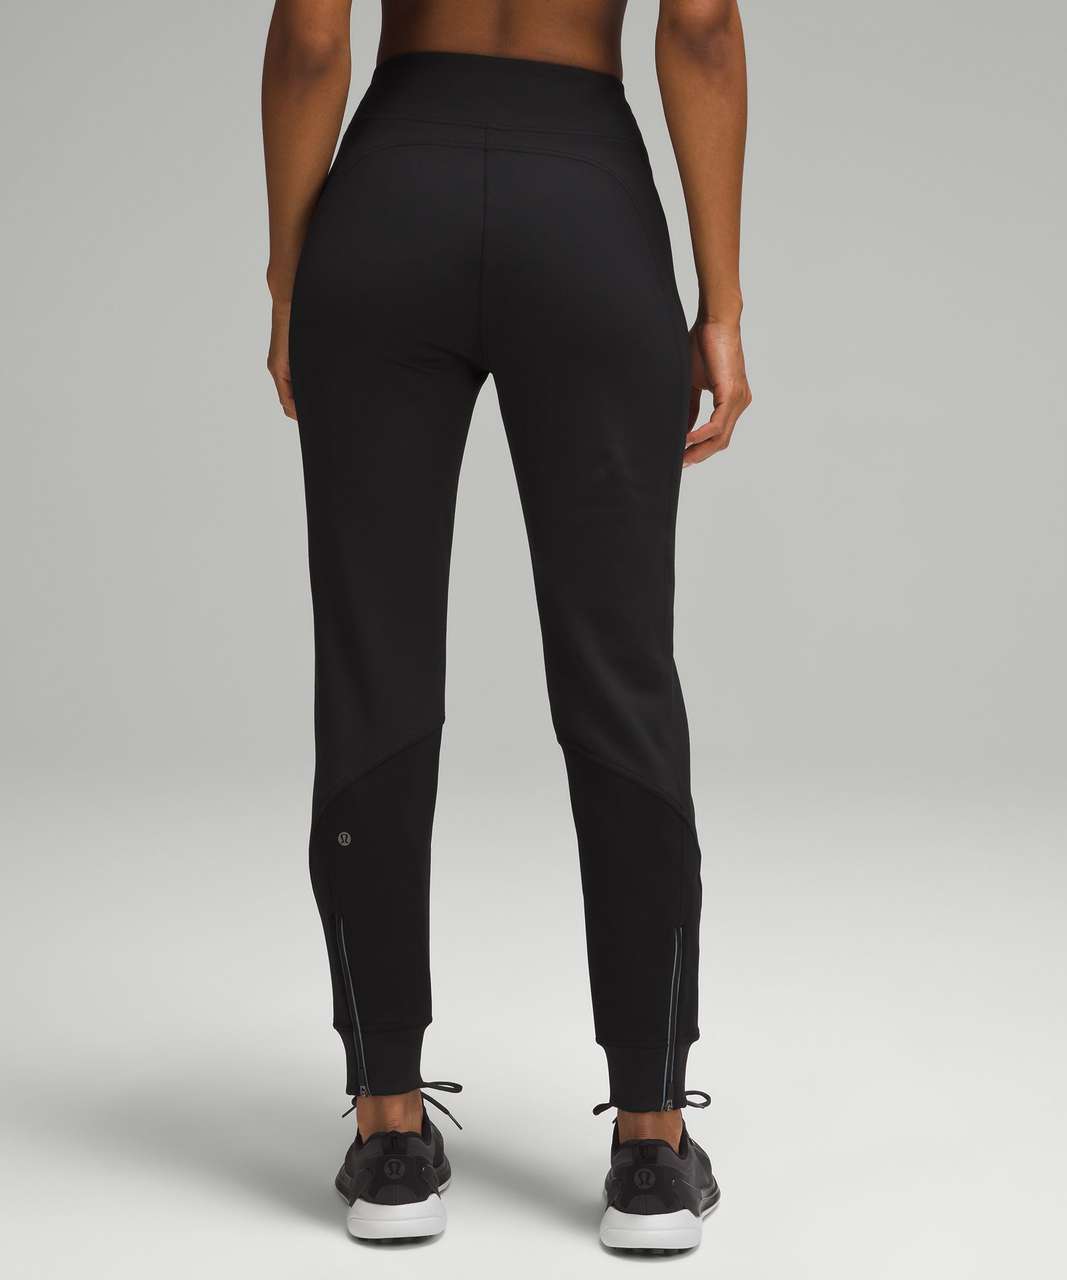 License to Train High-Rise Pant | Women's Joggers